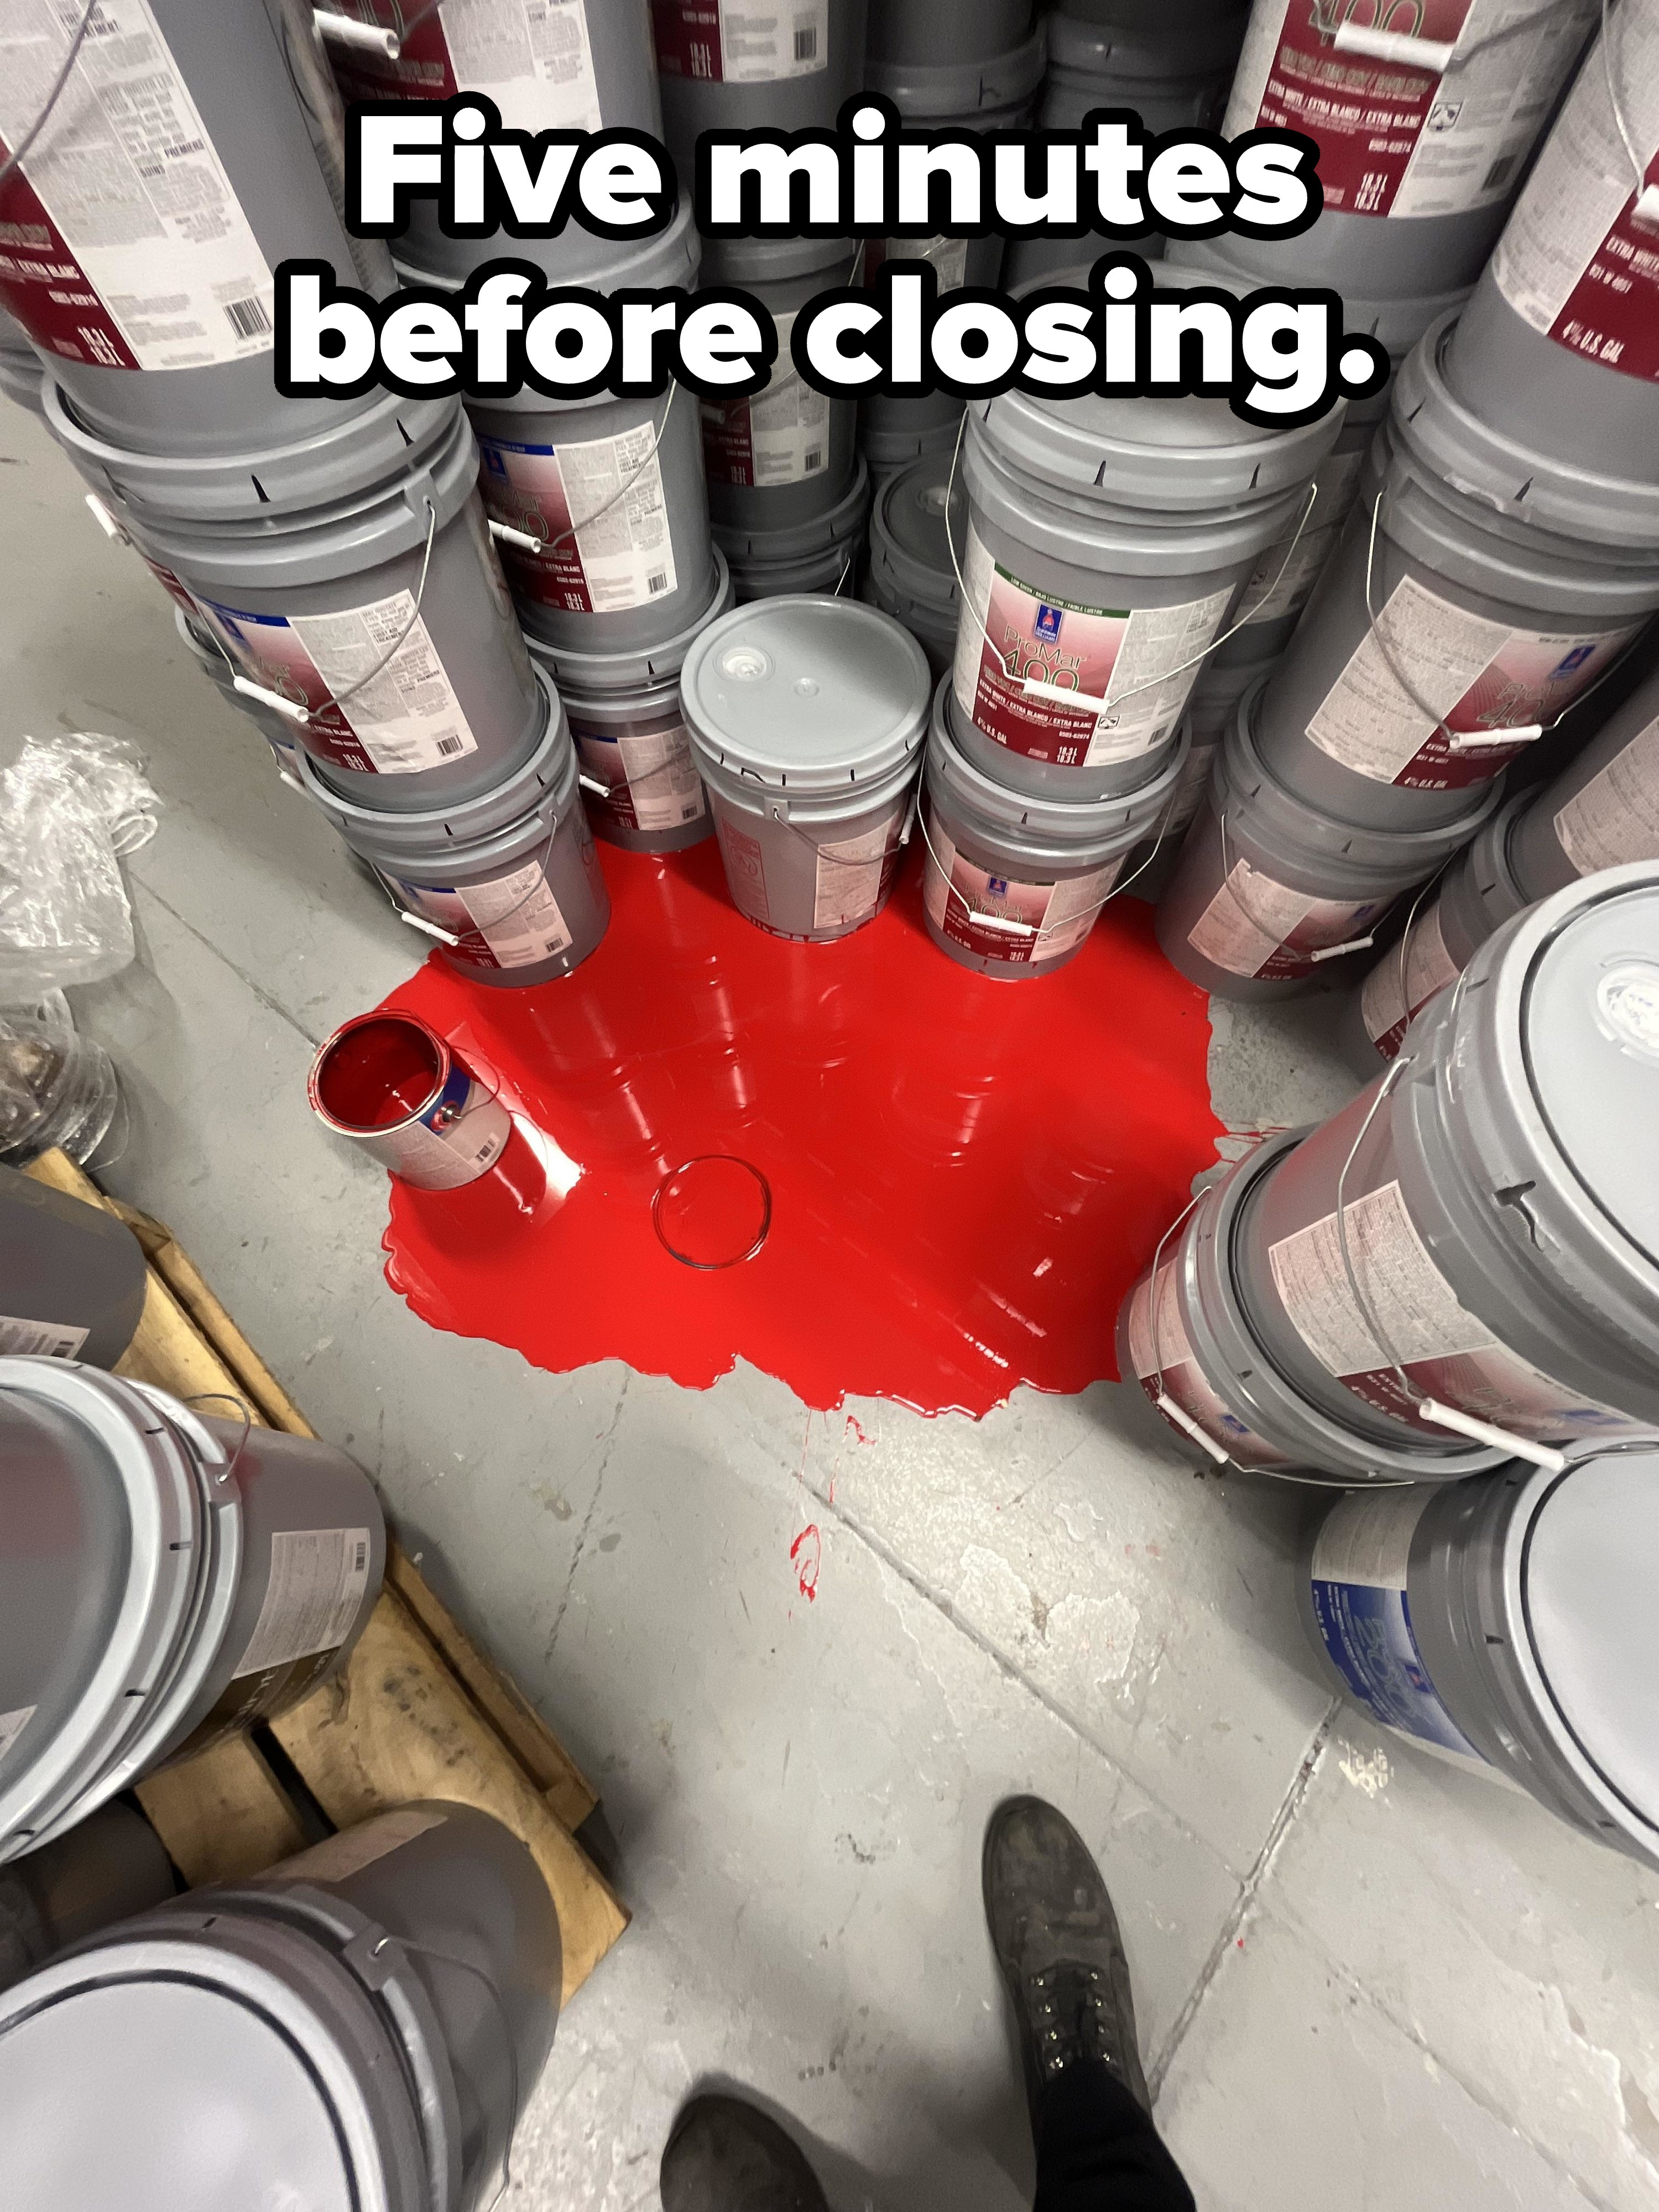 Spilled paint in a supply room